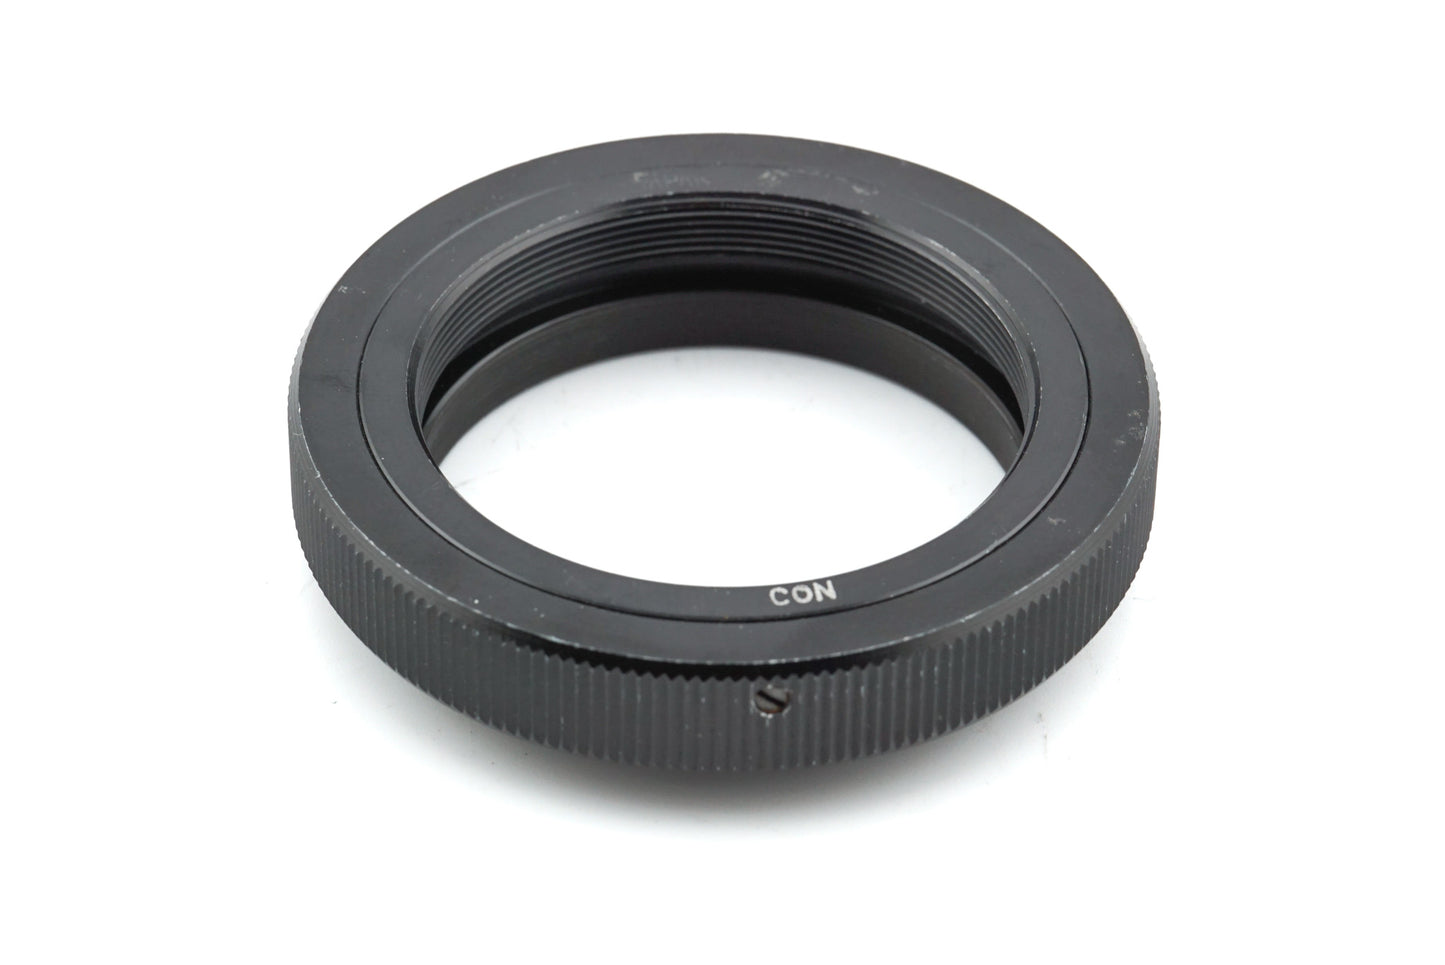 Generic T2 - Contax / Yashica Adapter - Lens Adapter